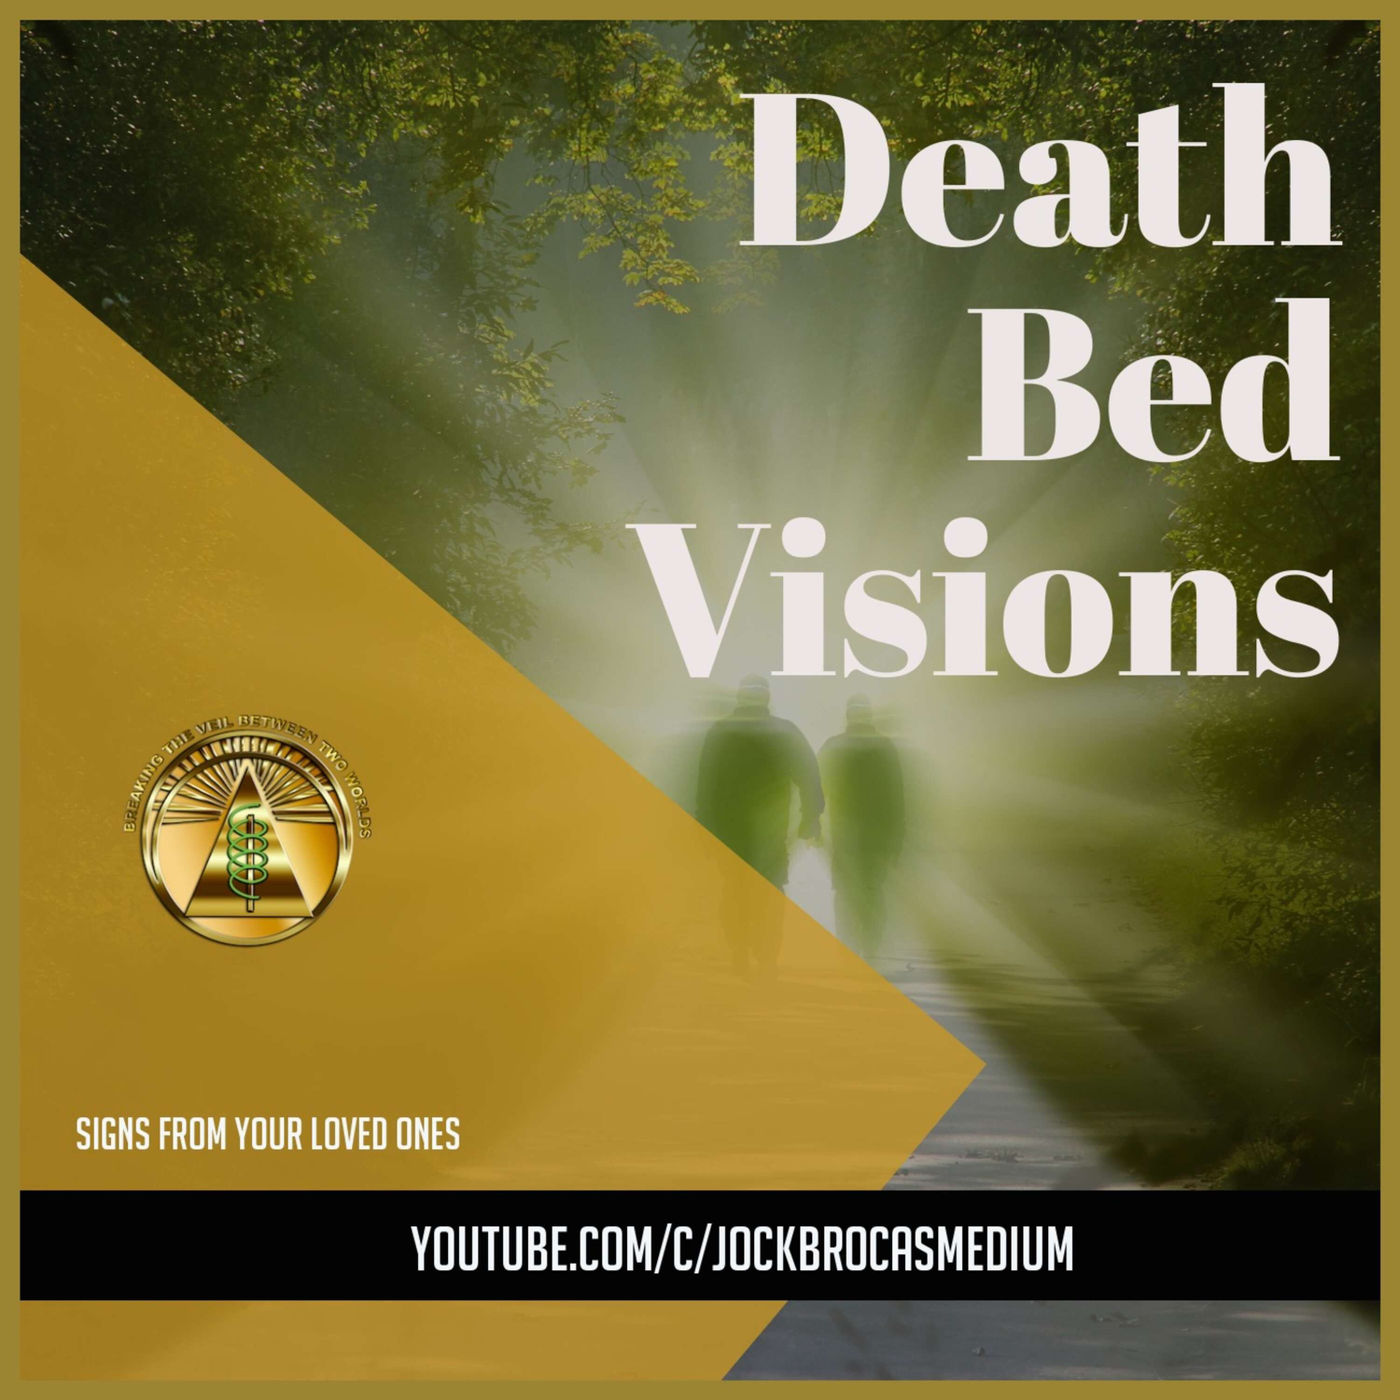 Death Bed Visions